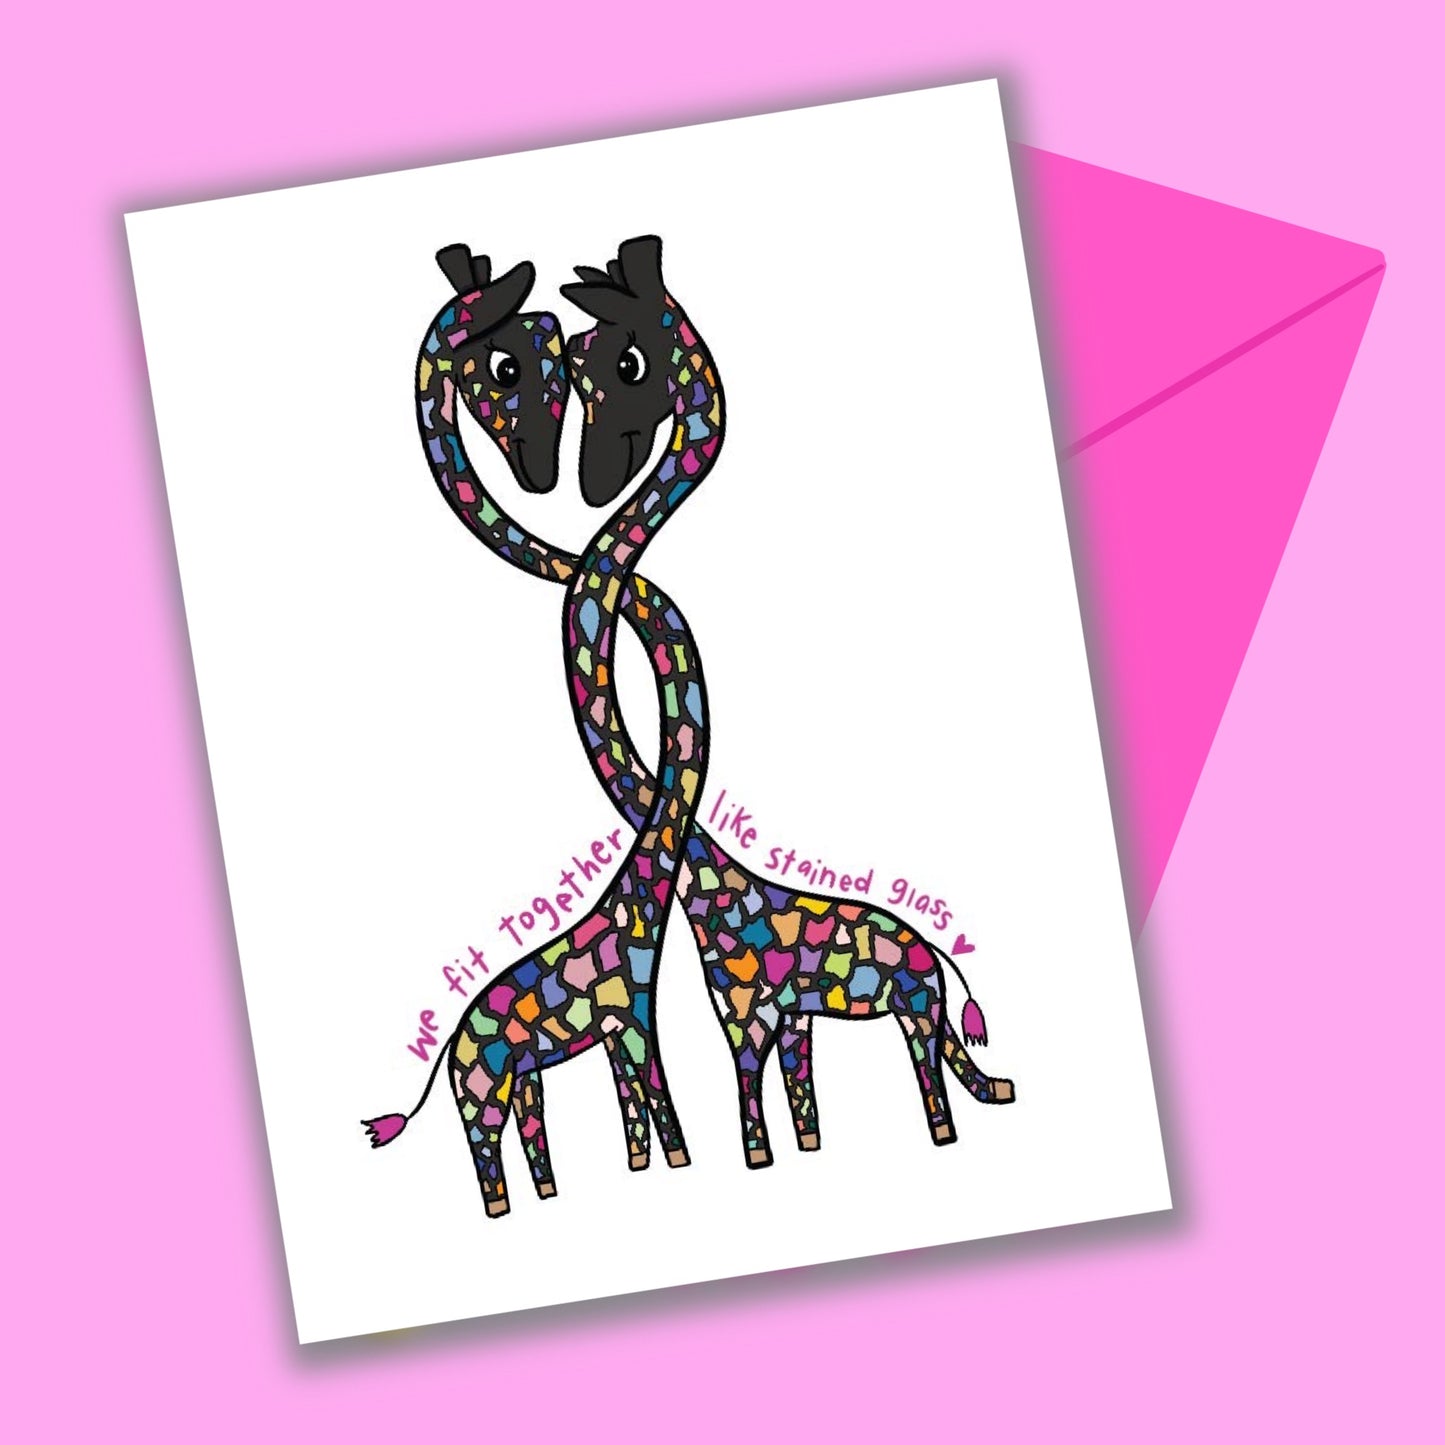 Stained Glass Giraffes Greeting Card